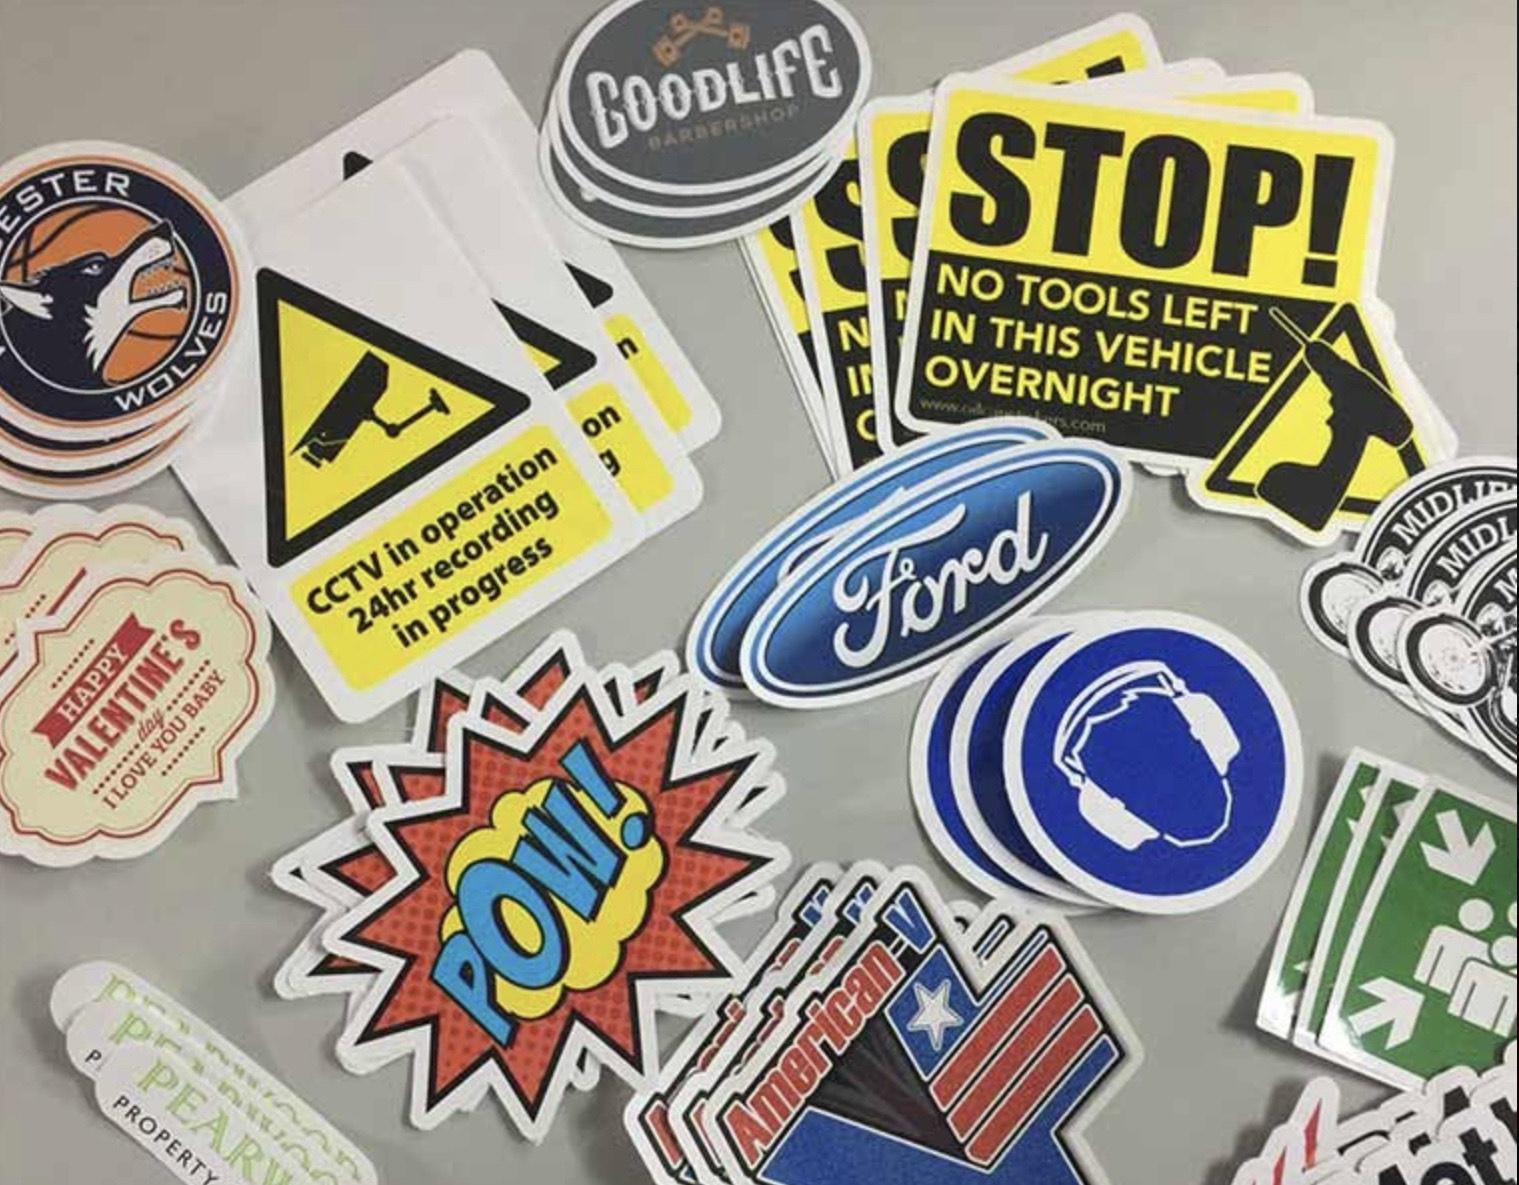 Cheap Full Custom Printed Stickers with FREE UK